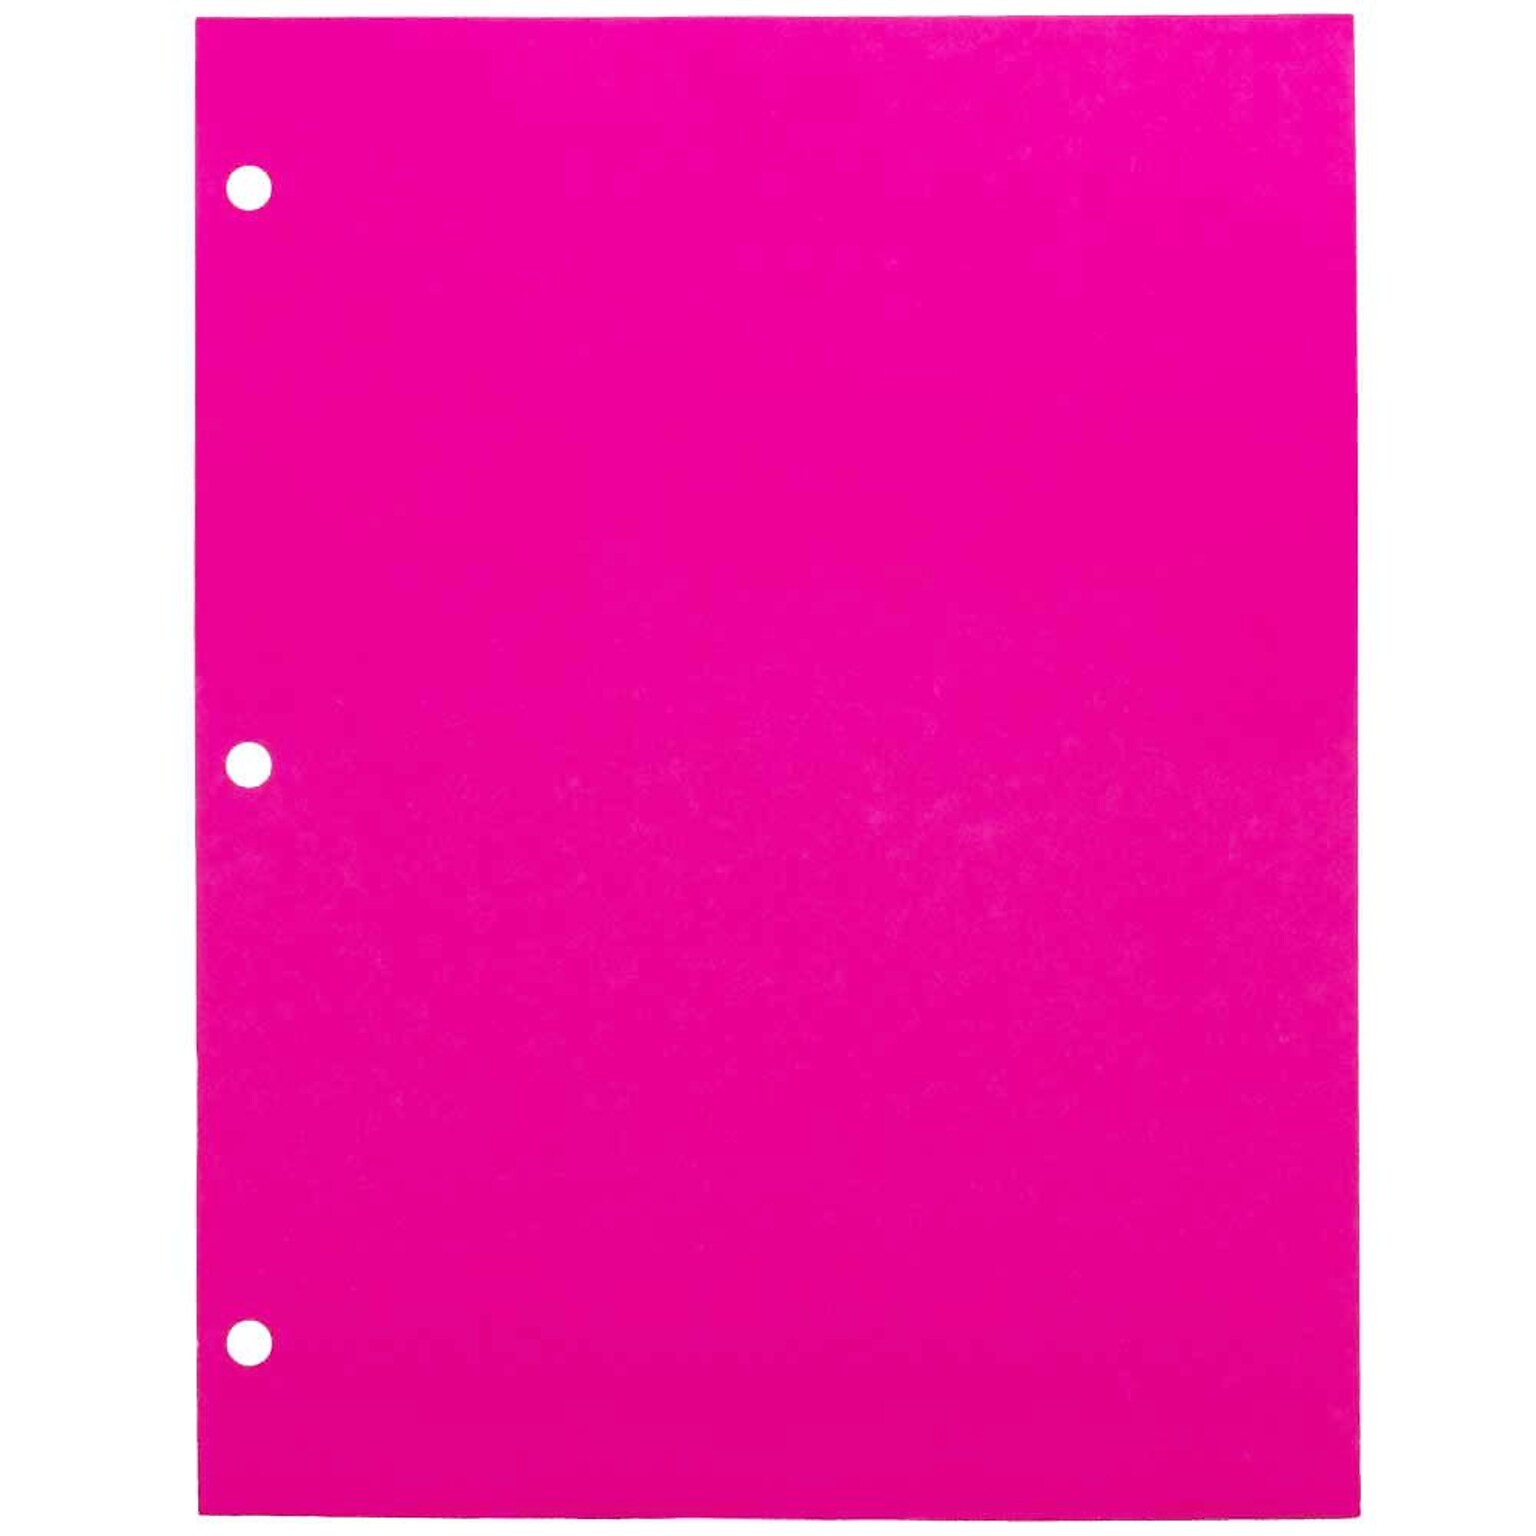 JAM Paper 3 Hole Punch 24lb Colored Paper, 8.5 x 11, Ultra Fuchsia Pink, 100 Sheets/Pack (354428163)